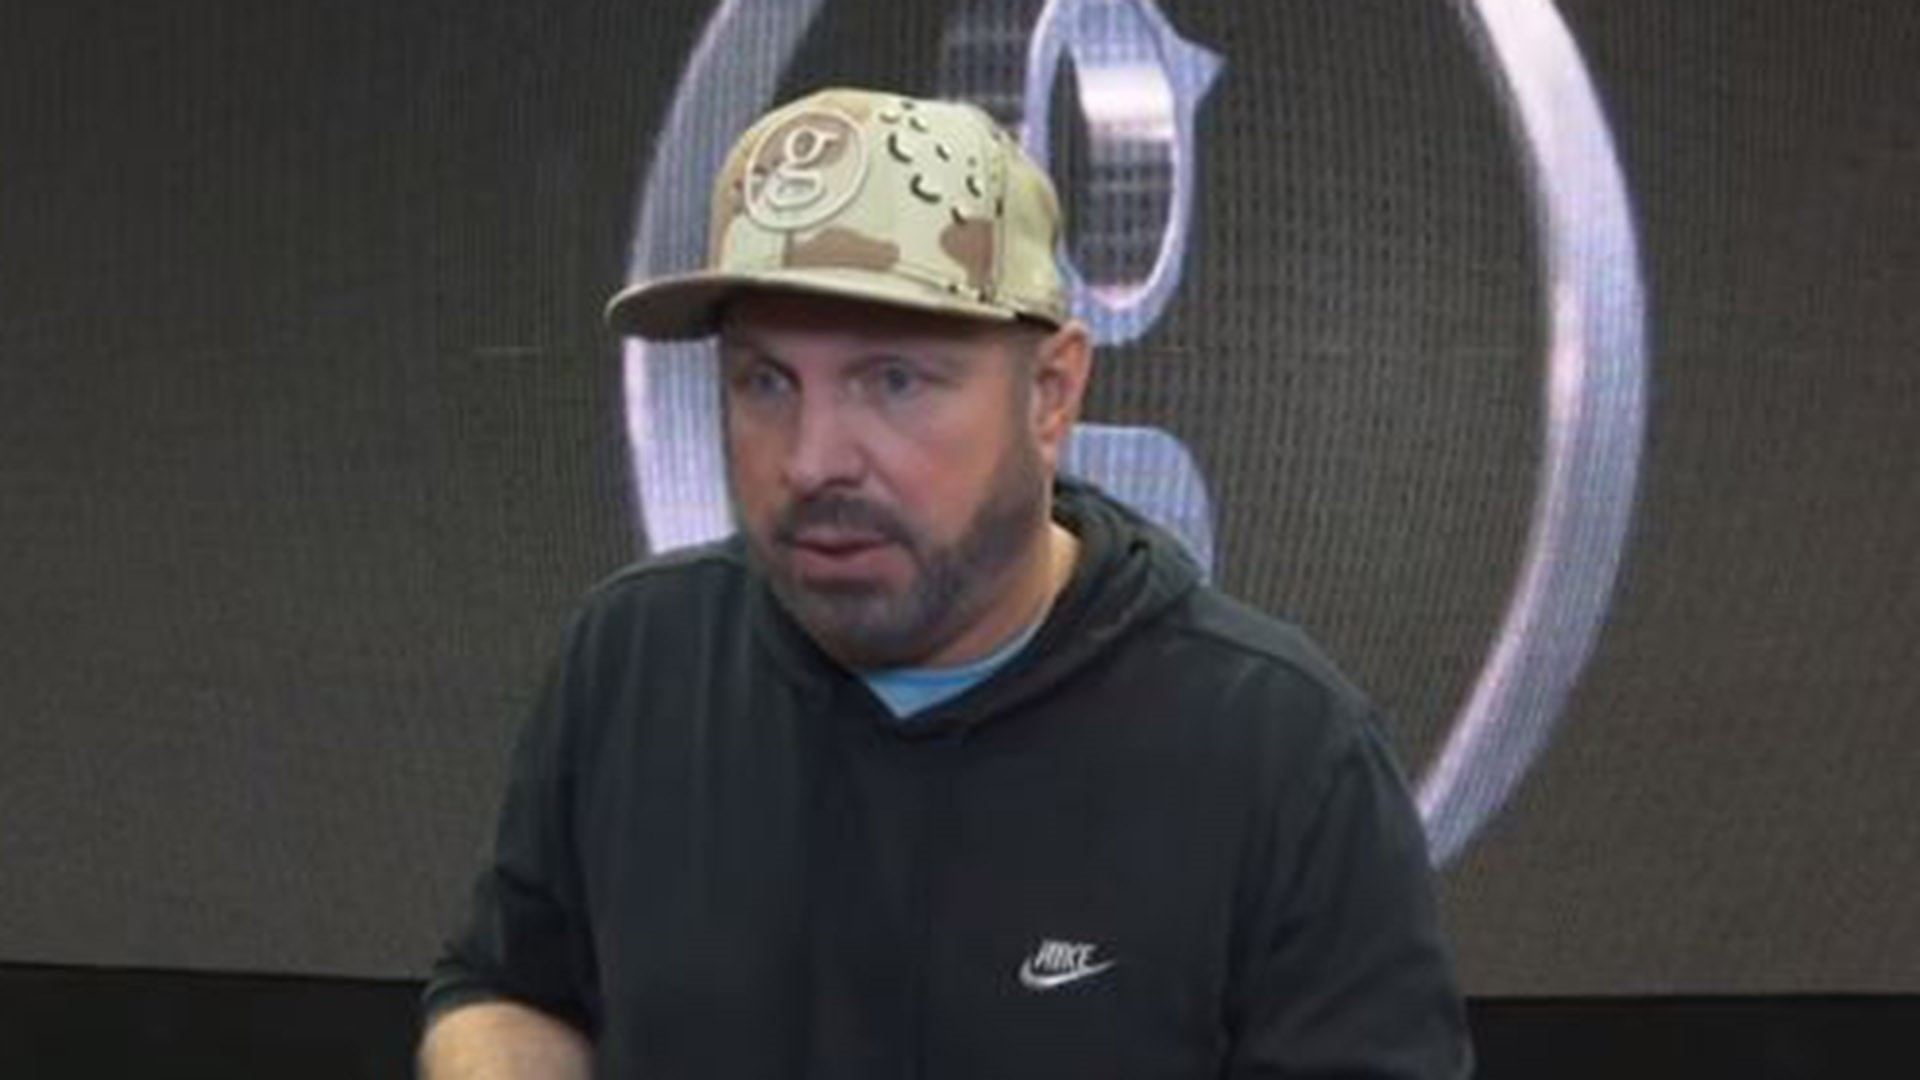 Garth Brooks says he doesn't plan to do more stadium tours after this one wraps up, citing constant rescheduling due to the pandemic and the weather.